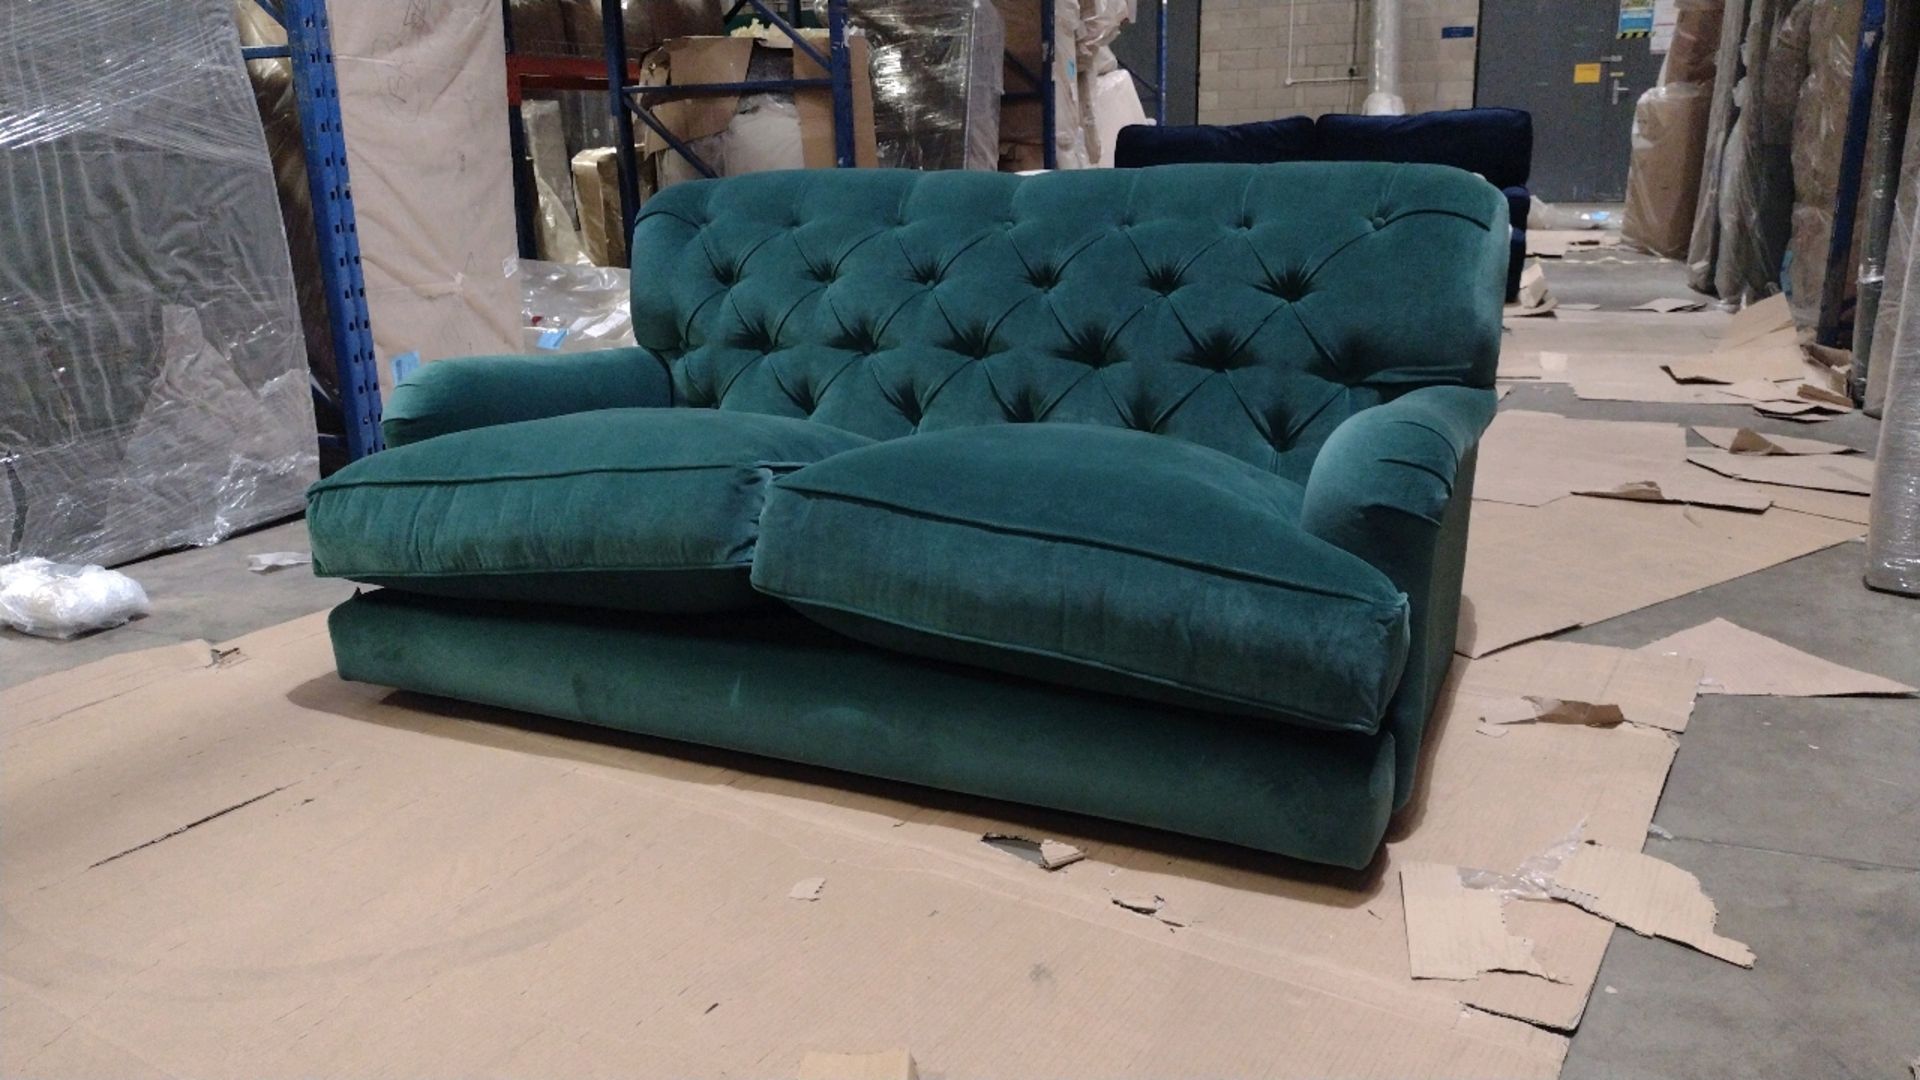 Snowdrop Button Back 2 Seat Sofa In Jade Smart Velvet RRP - £1890 - Image 3 of 9